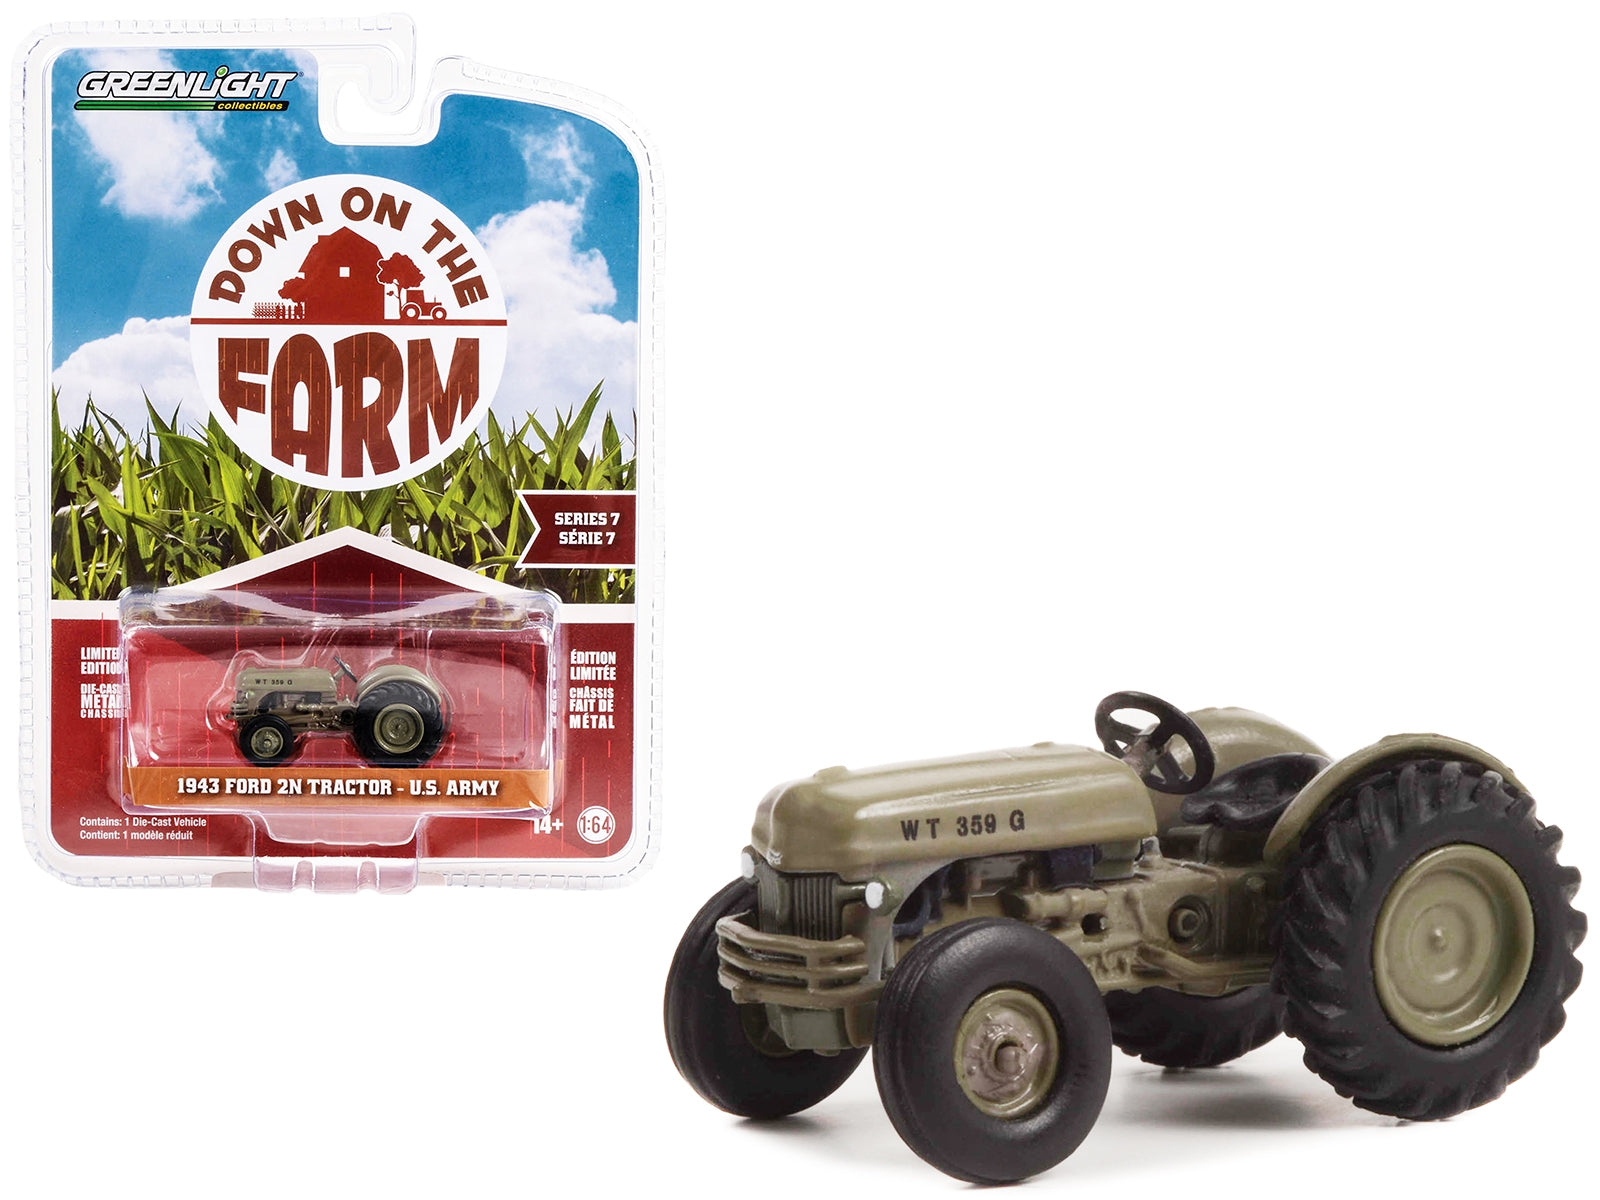 1943 Ford 2N Tractor Brown "U.S. Army" "Down on the Farm" Series 7 1/64 Diecast Model by Greenlight